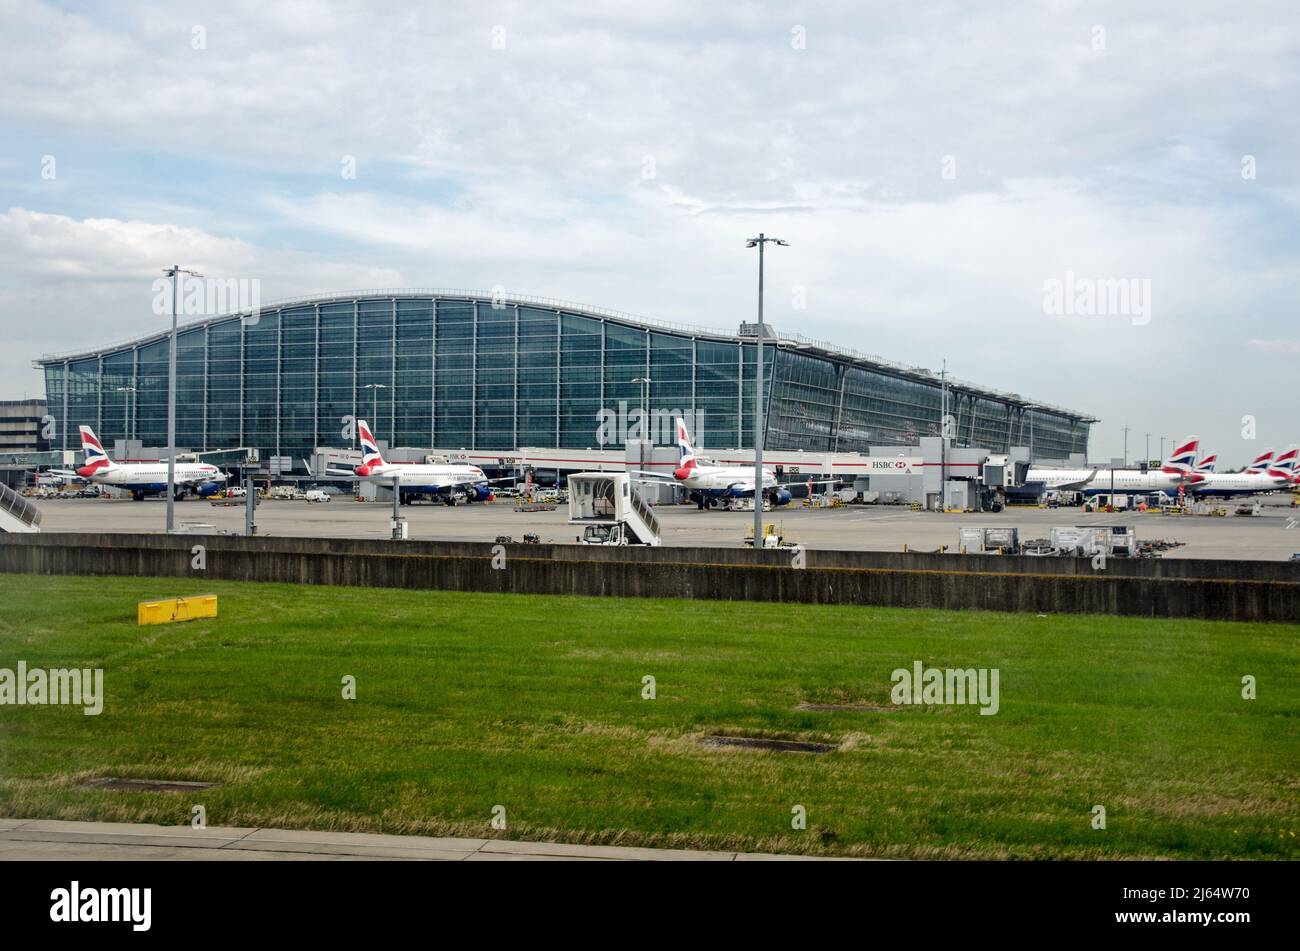 London, UK - April 19, 2022: Stands full of British Airways planes at the main Terminal 5 building at London's Heathrow Airport on a sunny spring morn Stock Photo